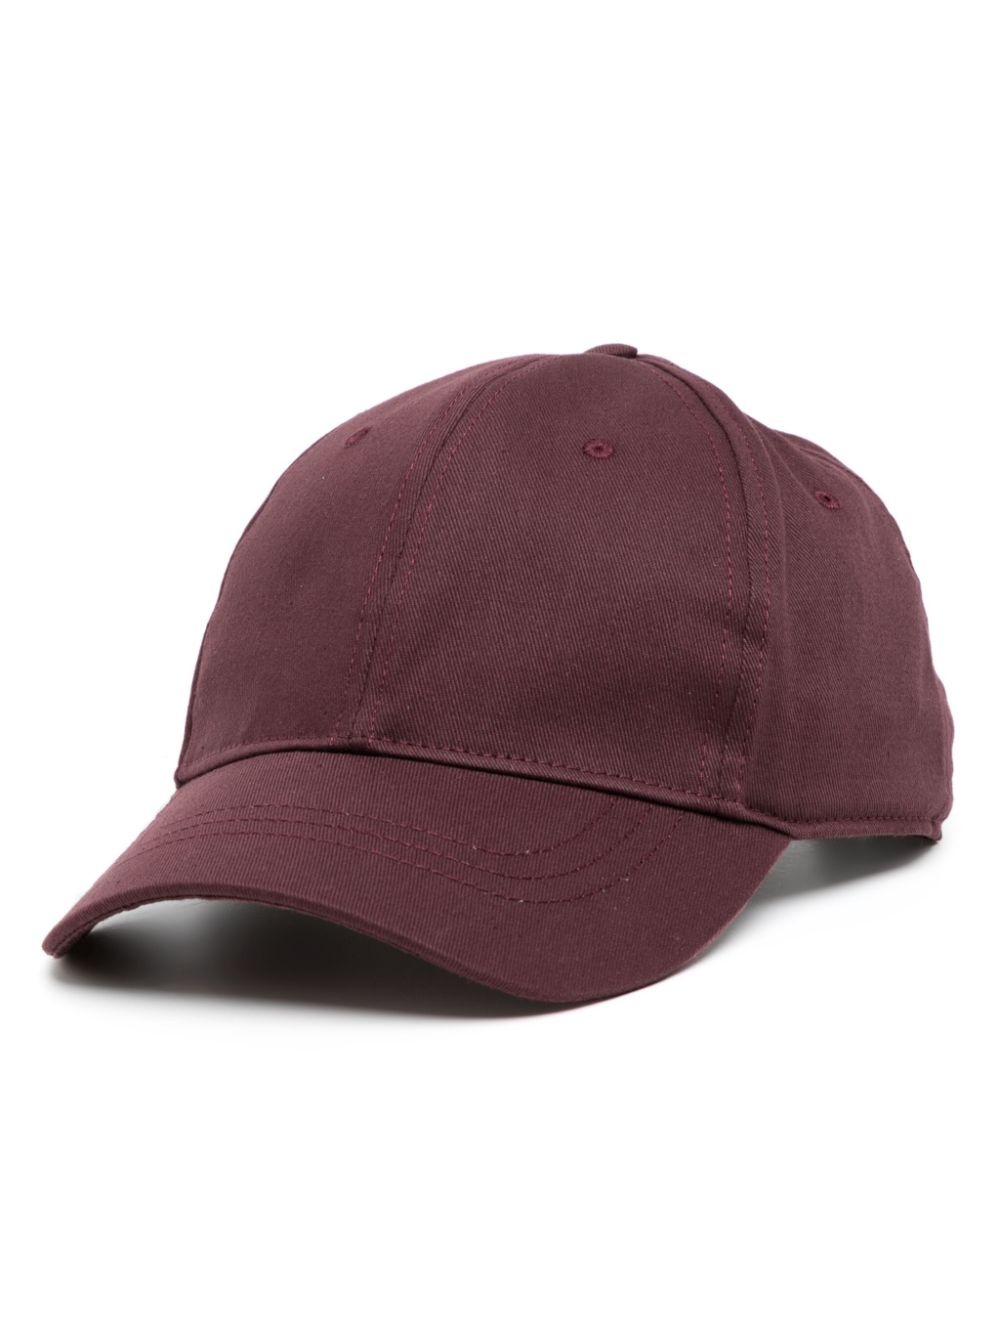 embroidered-logo six-panel cap - 1